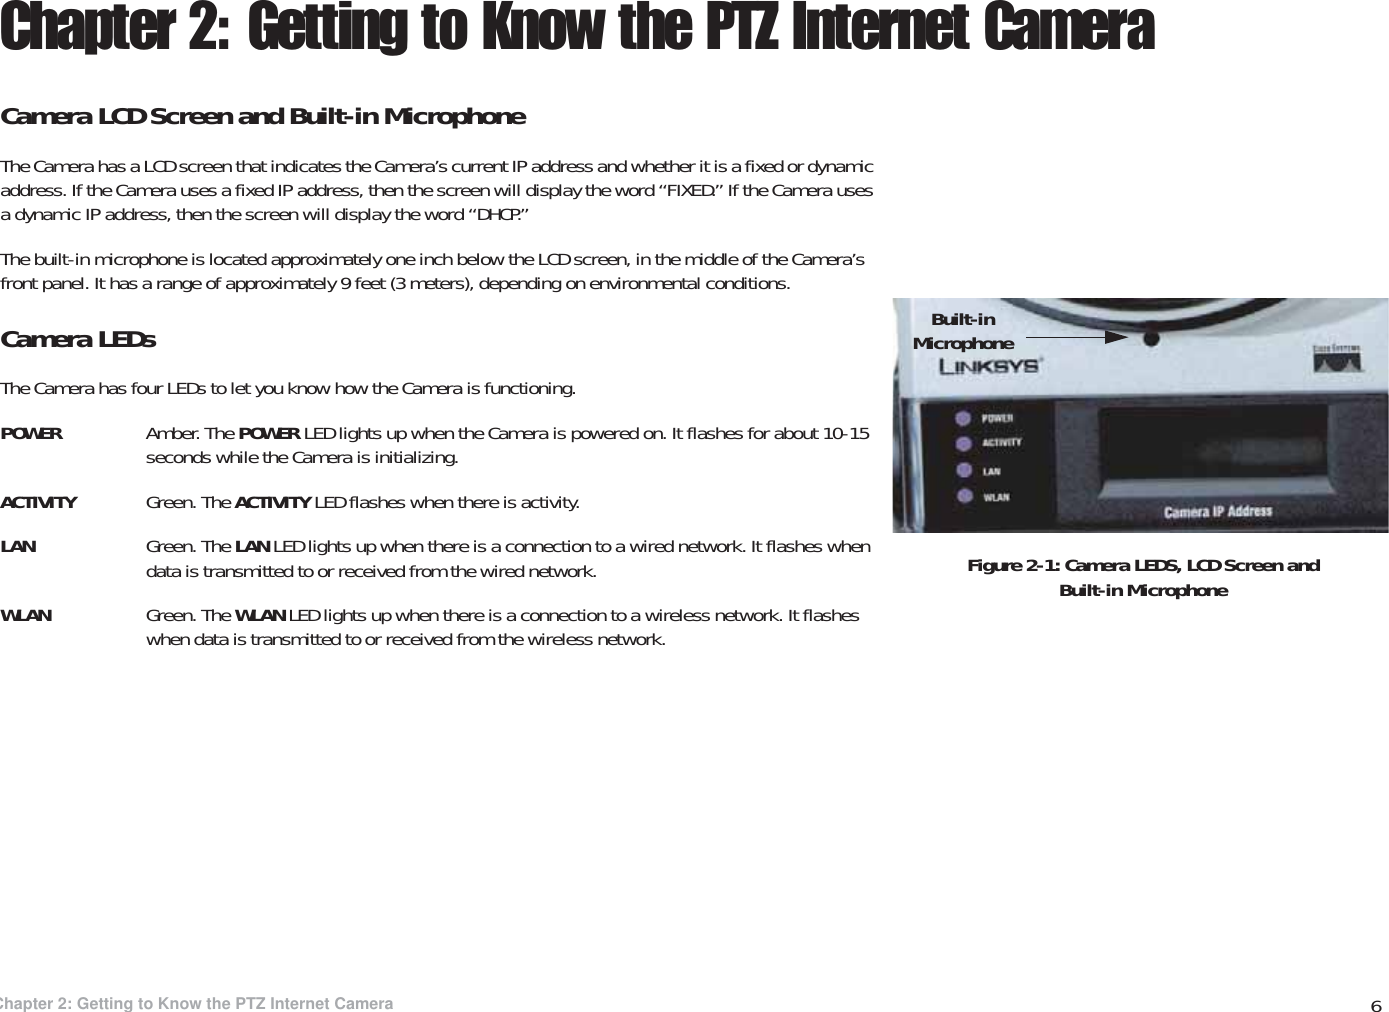 6Chapter 2: Getting to Know the PTZ Internet CameraCamera LCD Screen and Built-in MicrophoneWireless-G PTZ Internet Video Camera with AudioChapter 2: Getting to Know the PTZ Internet CameraCamera LCD Screen and Built-in MicrophoneThe Camera has a LCD screen that indicates the Camera’s current IP address and whether it is a fixed or dynamic address. If the Camera uses a fixed IP address, then the screen will display the word “FIXED.” If the Camera uses a dynamic IP address, then the screen will display the word “DHCP.” The built-in microphone is located approximately one inch below the LCD screen, in the middle of the Camera’s front panel. It has a range of approximately 9 feet (3 meters), depending on environmental conditions.Camera LEDsThe Camera has four LEDs to let you know how the Camera is functioning.POWER Amber. The POWER LED lights up when the Camera is powered on. It flashes for about 10-15 seconds while the Camera is initializing.ACTIVITY Green. The ACTIVITY LED flashes when there is activity.LAN Green. The LAN LED lights up when there is a connection to a wired network. It flashes when data is transmitted to or received from the wired network.WLAN Green. The WLAN LED lights up when there is a connection to a wireless network. It flashes when data is transmitted to or received from the wireless network.Figure 2-1: Camera LEDS, LCD Screen and Built-in MicrophoneBuilt-in Microphone